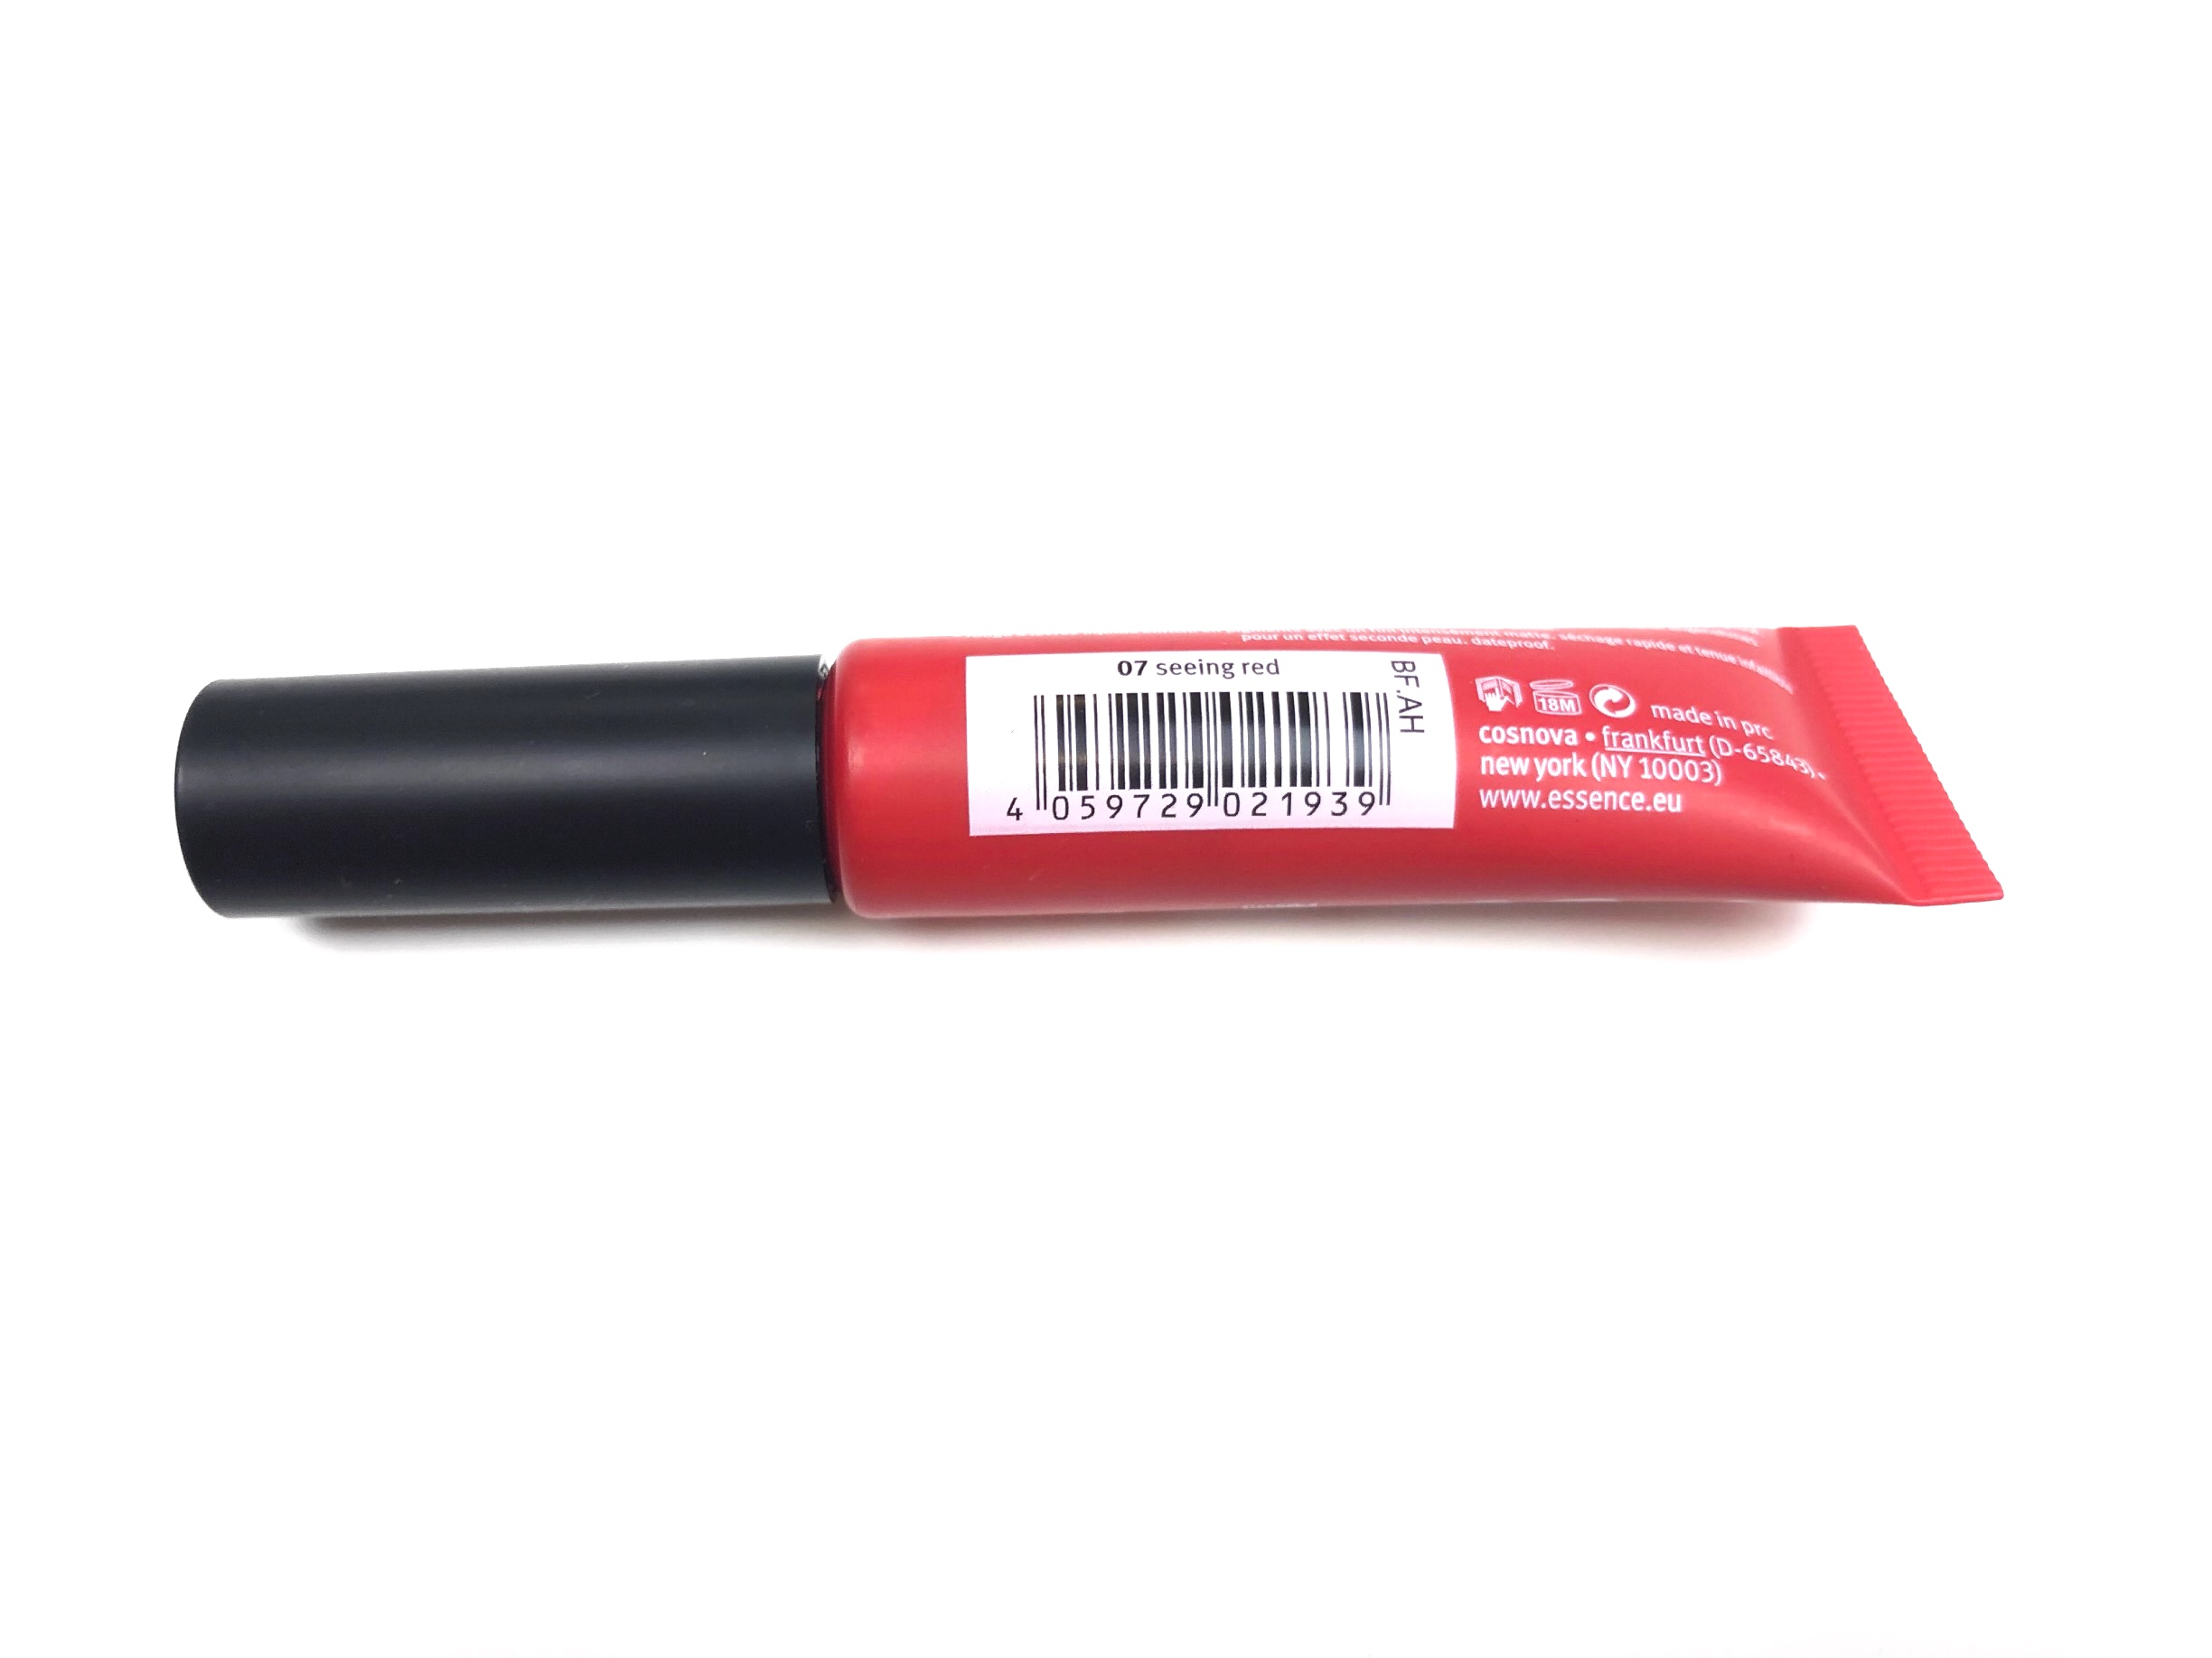 Essence Colour Boost Mad About Matte Liquid Lipstick in 07 Seeing Red